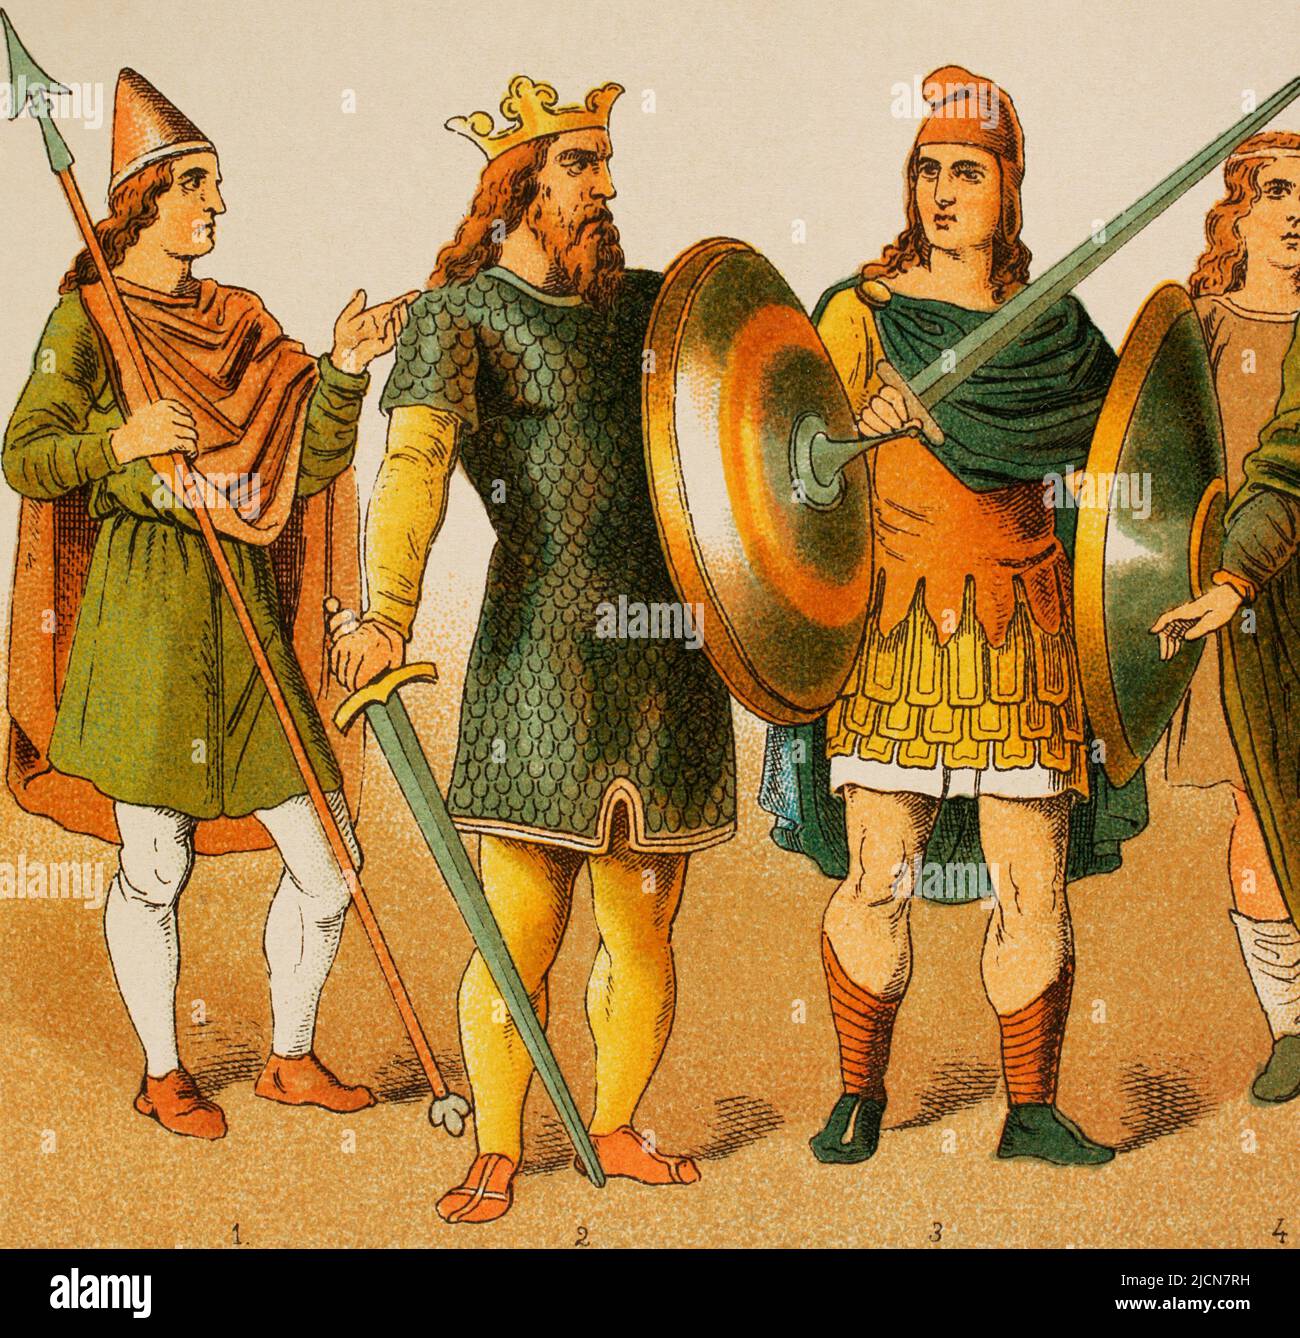 Anglo-Saxons (500-1000). From left to right, 1: Warrior, 2: King (750), 3: Warrior. Chromolithography. 'Historia Universal' (Universal History), by César Cantú. Volume IV. Published in Barcelona, 1881. Stock Photo